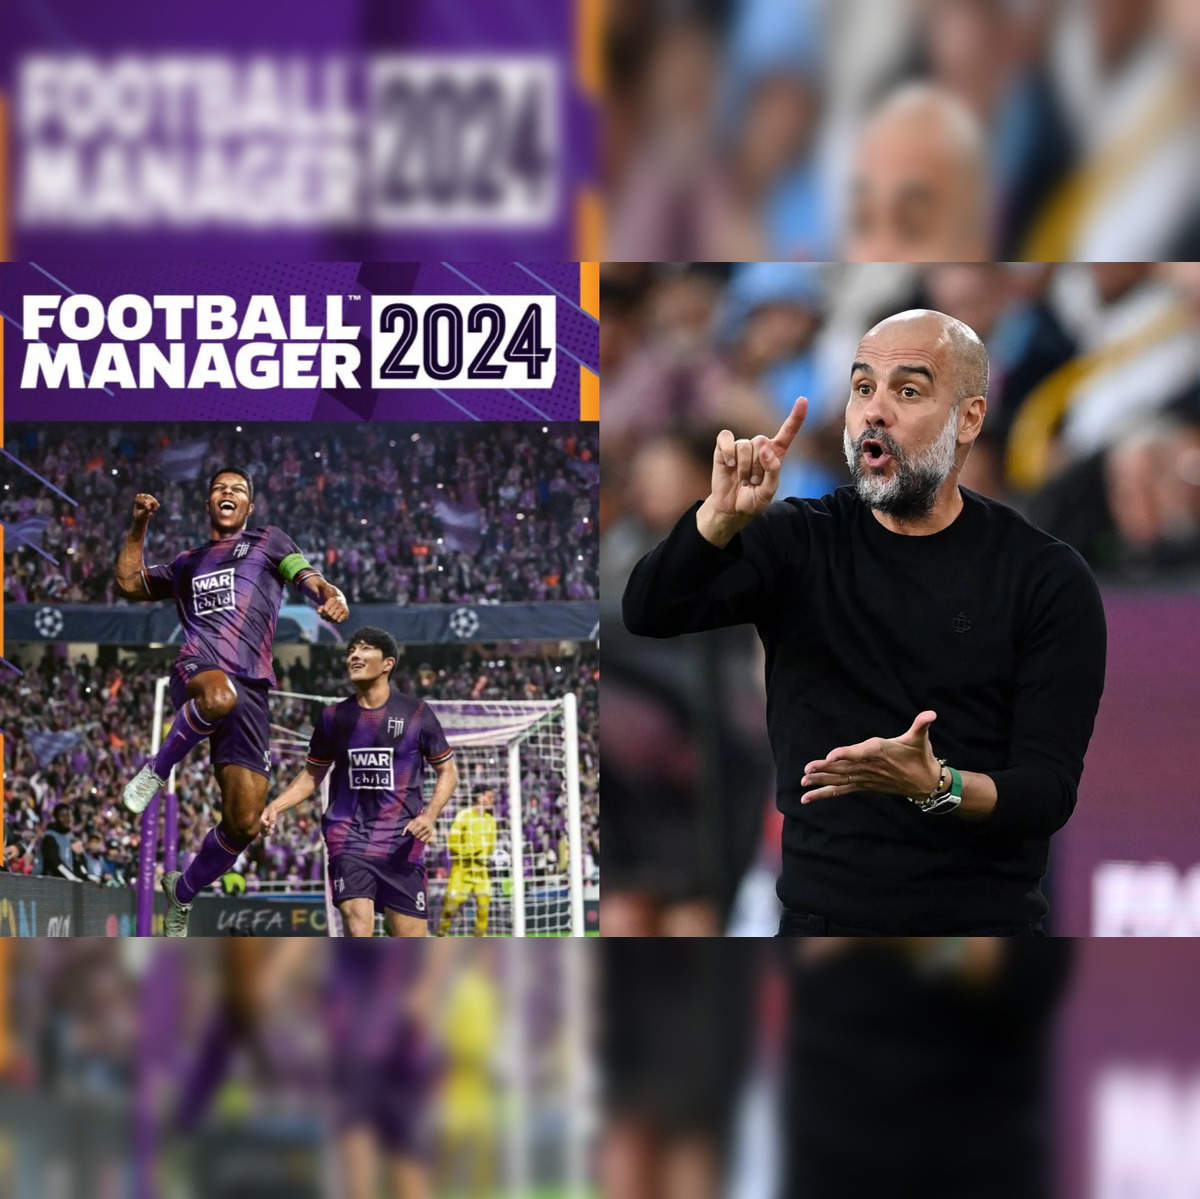 Play Football Manager 2023 For Free Starting Today with Prime